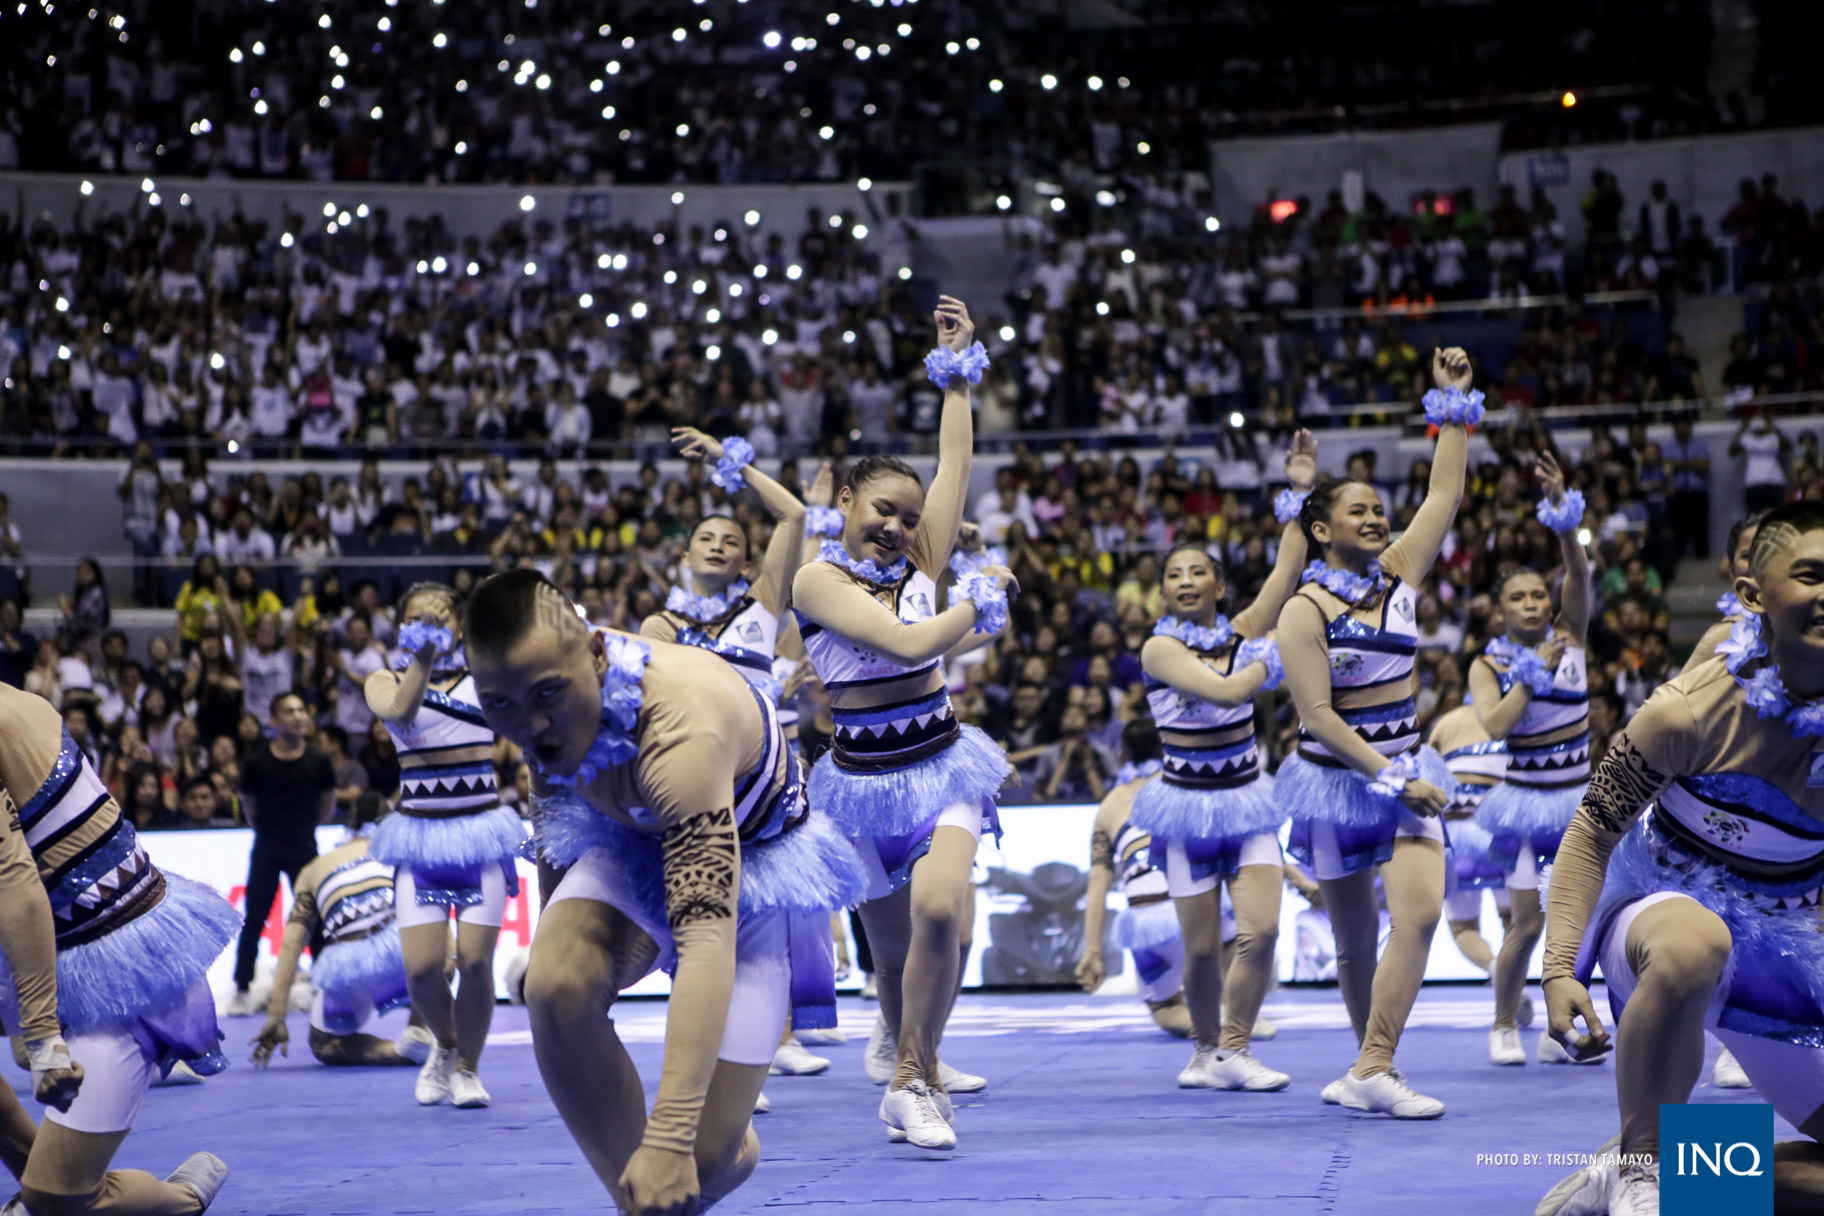 Adamson Pep Squad crashed the top 3 in UAAP Season 79 Cheerdance Competition.